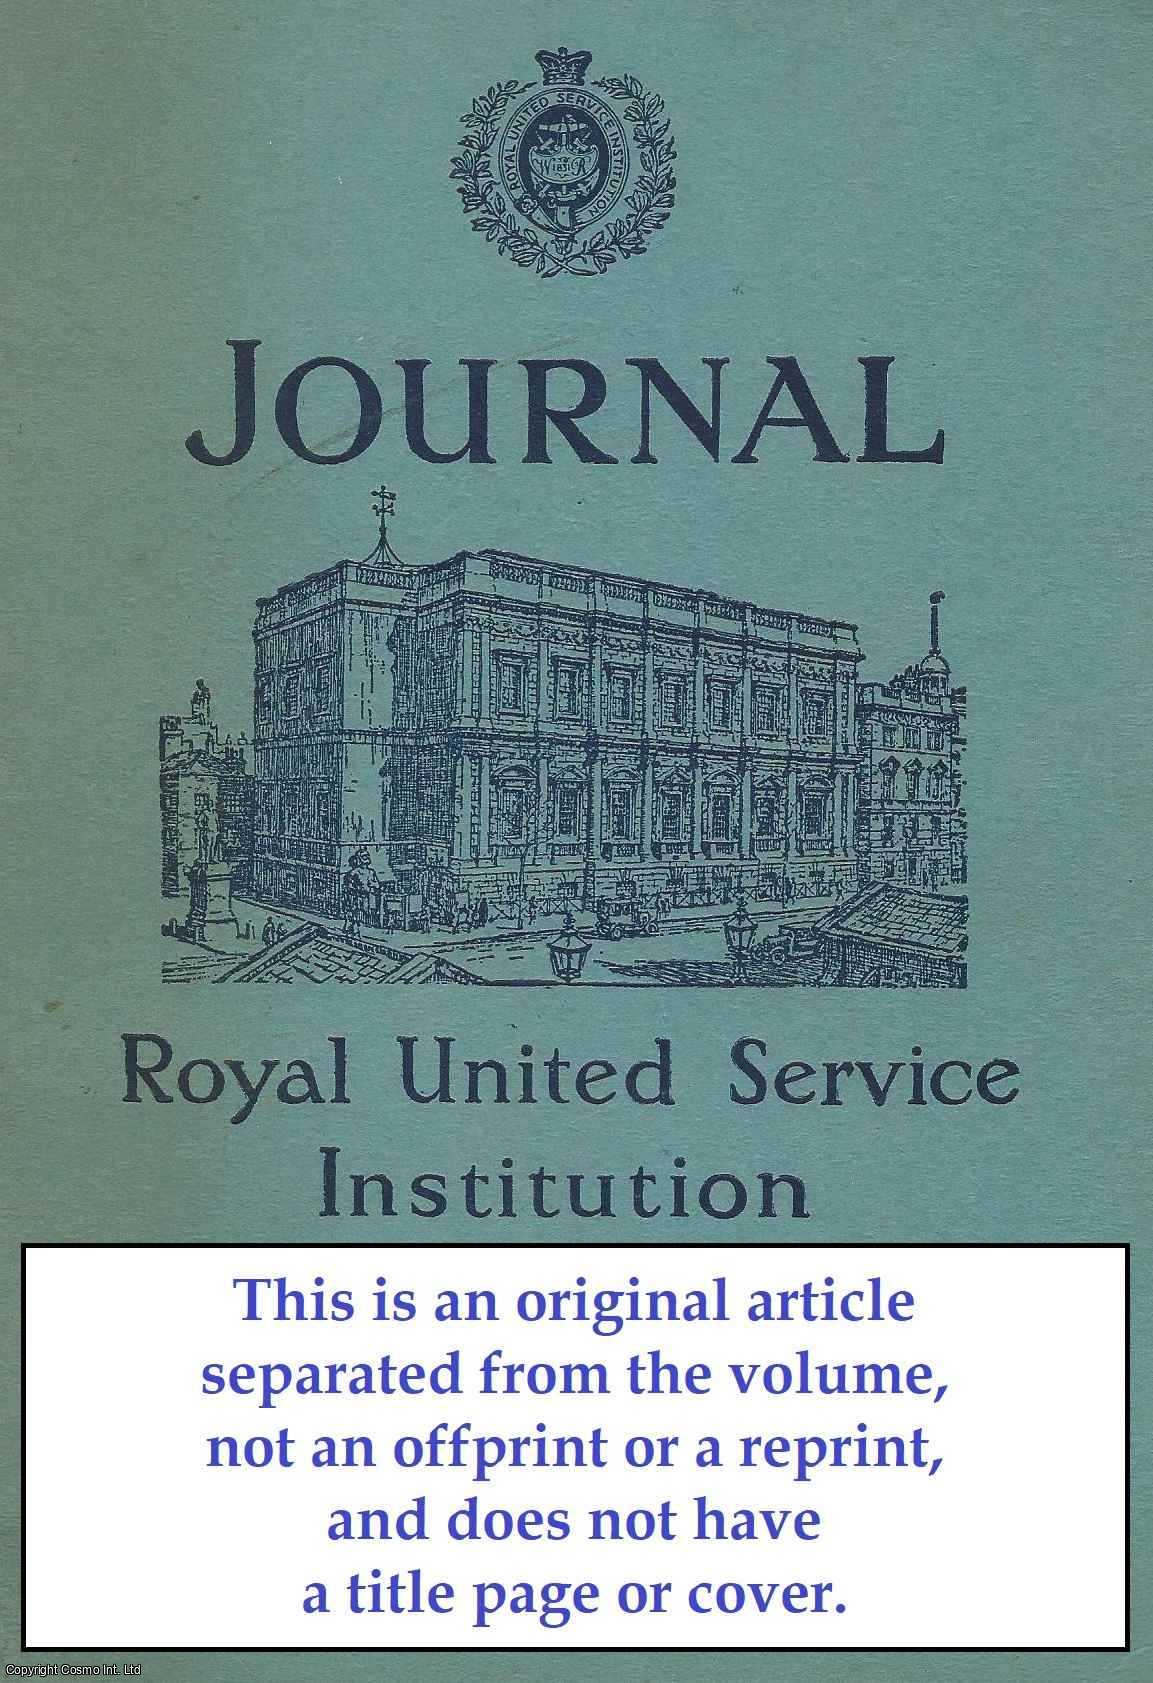 Correlli Barnett - The British Armed Forces in Transition. An original article from The Royal United Service Institution Journal, 1970.